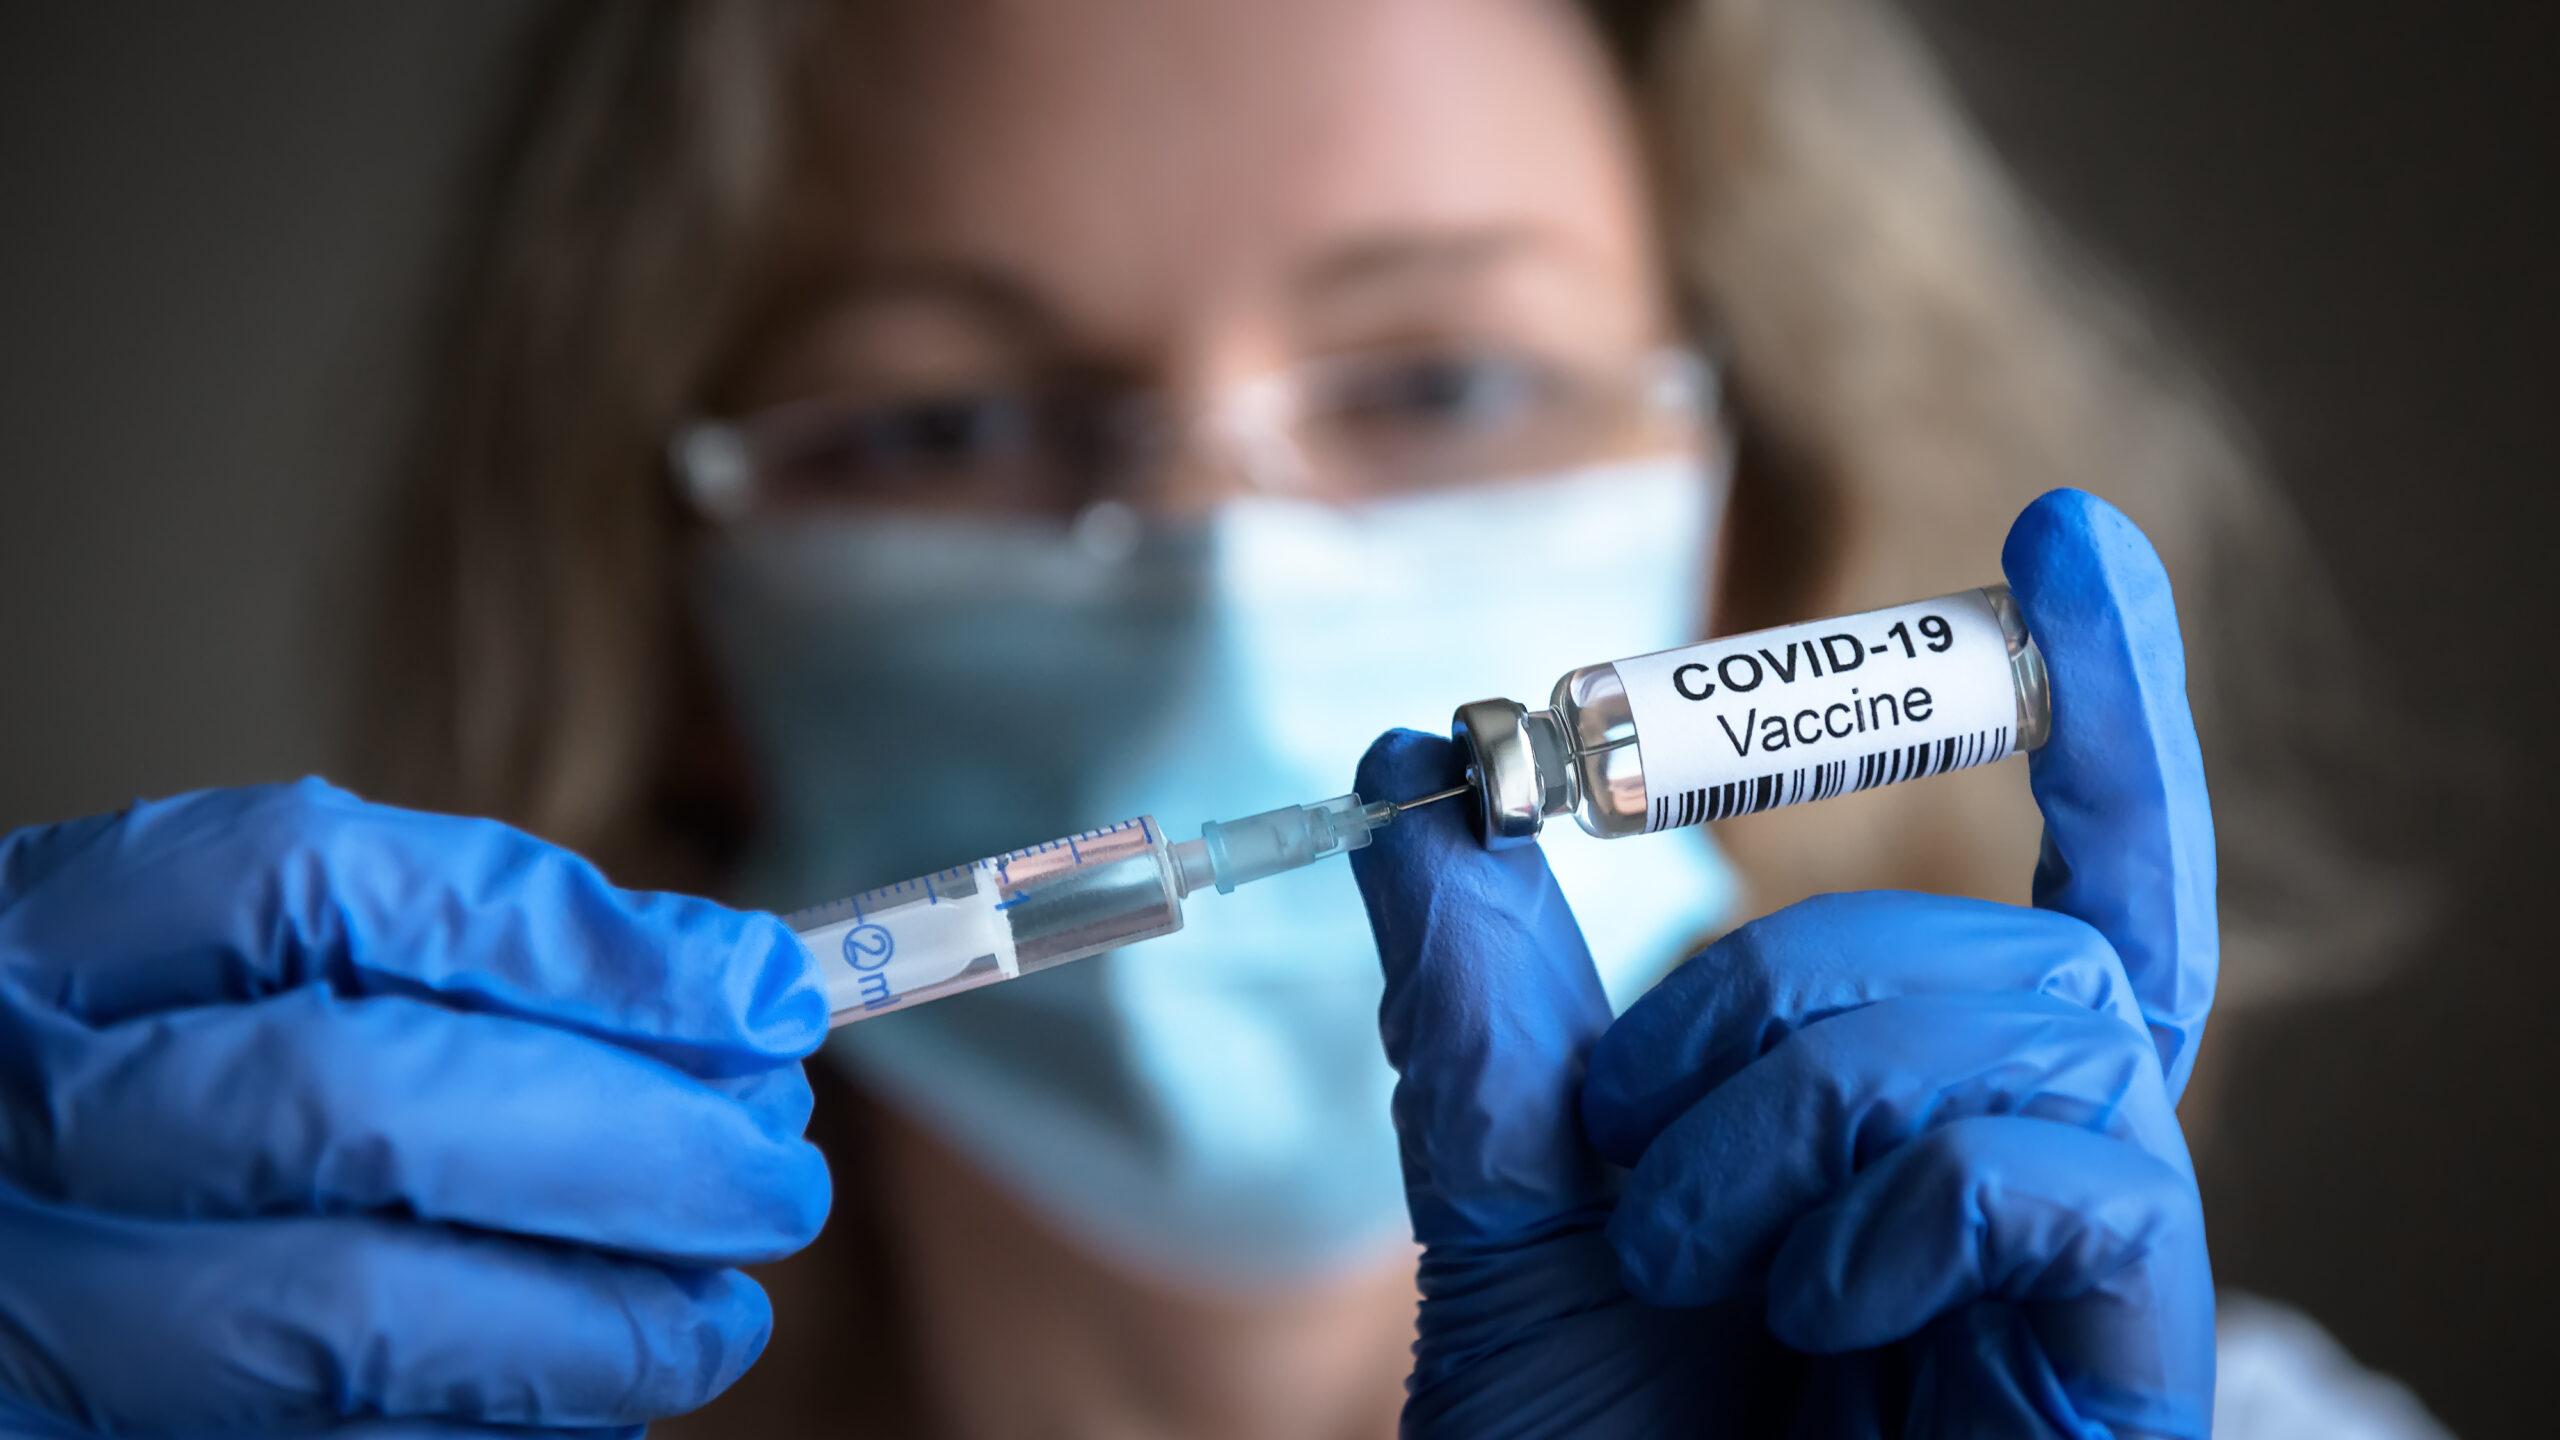 Supporting the NHS, RMI delivers almost 5,000 mobile COVID-19 vaccines in single month